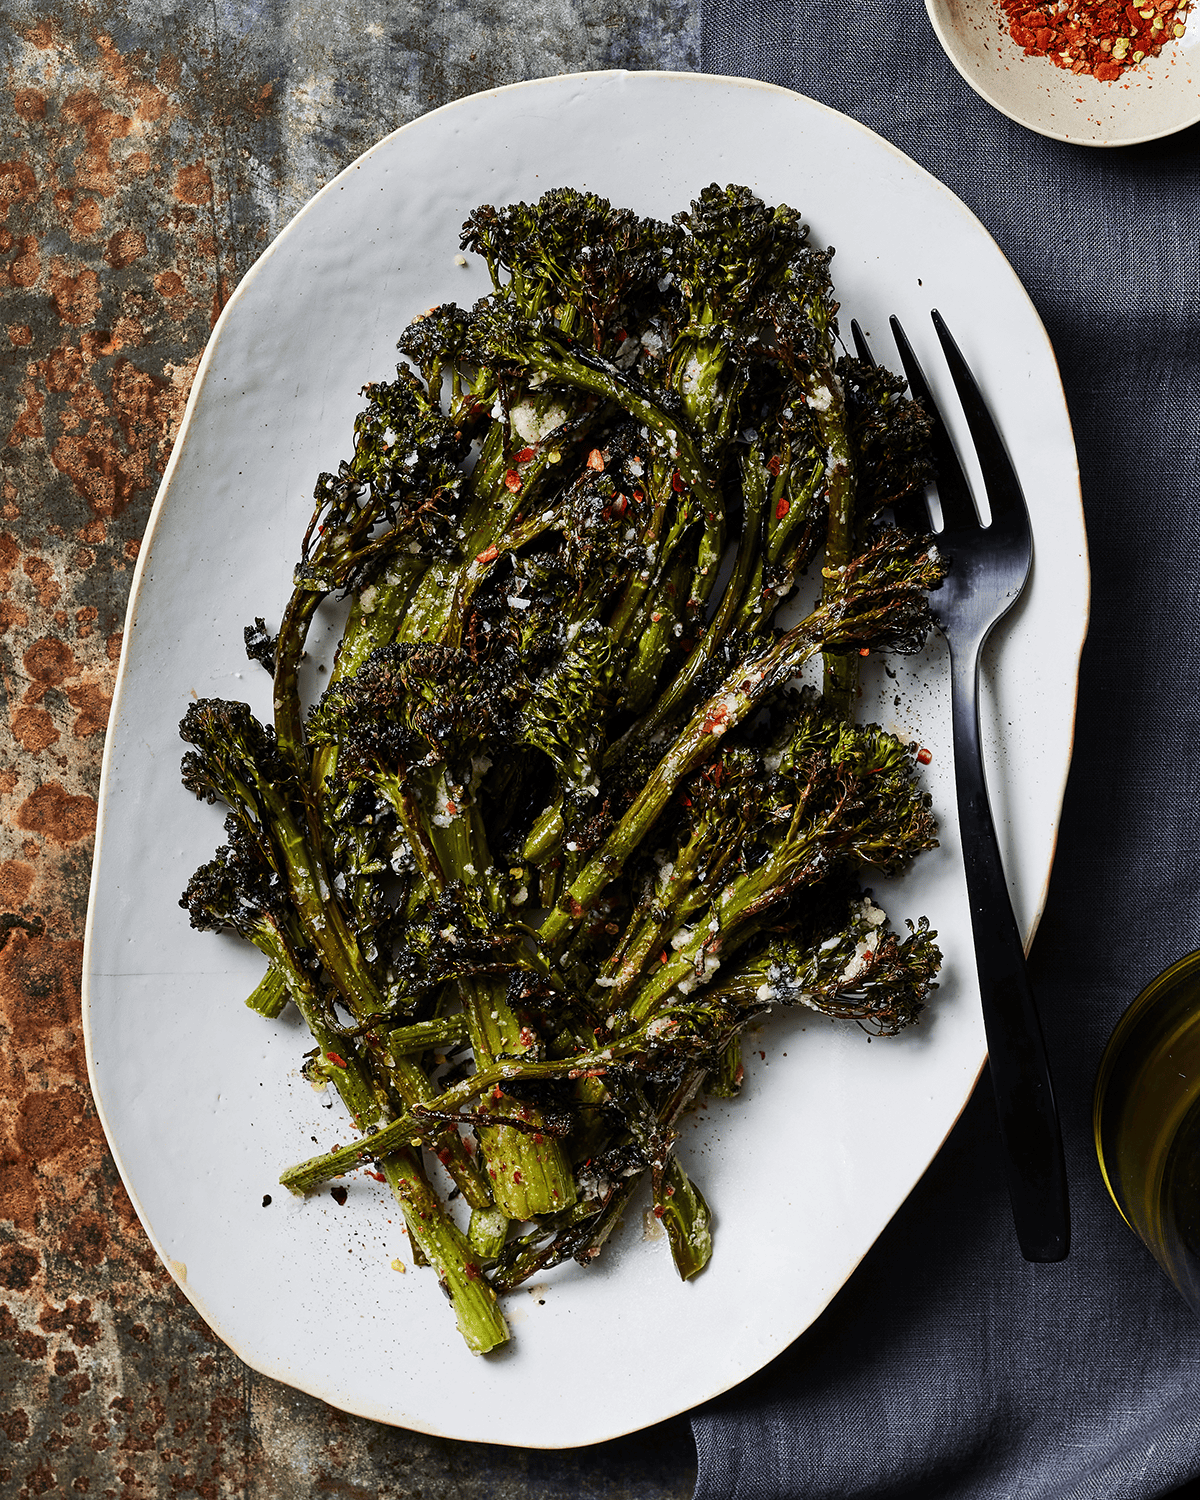 Roasted Broccolini with red pepper flakes sitting in a bowl with a fork next to a bowl of red pepper flakes on a table top.  